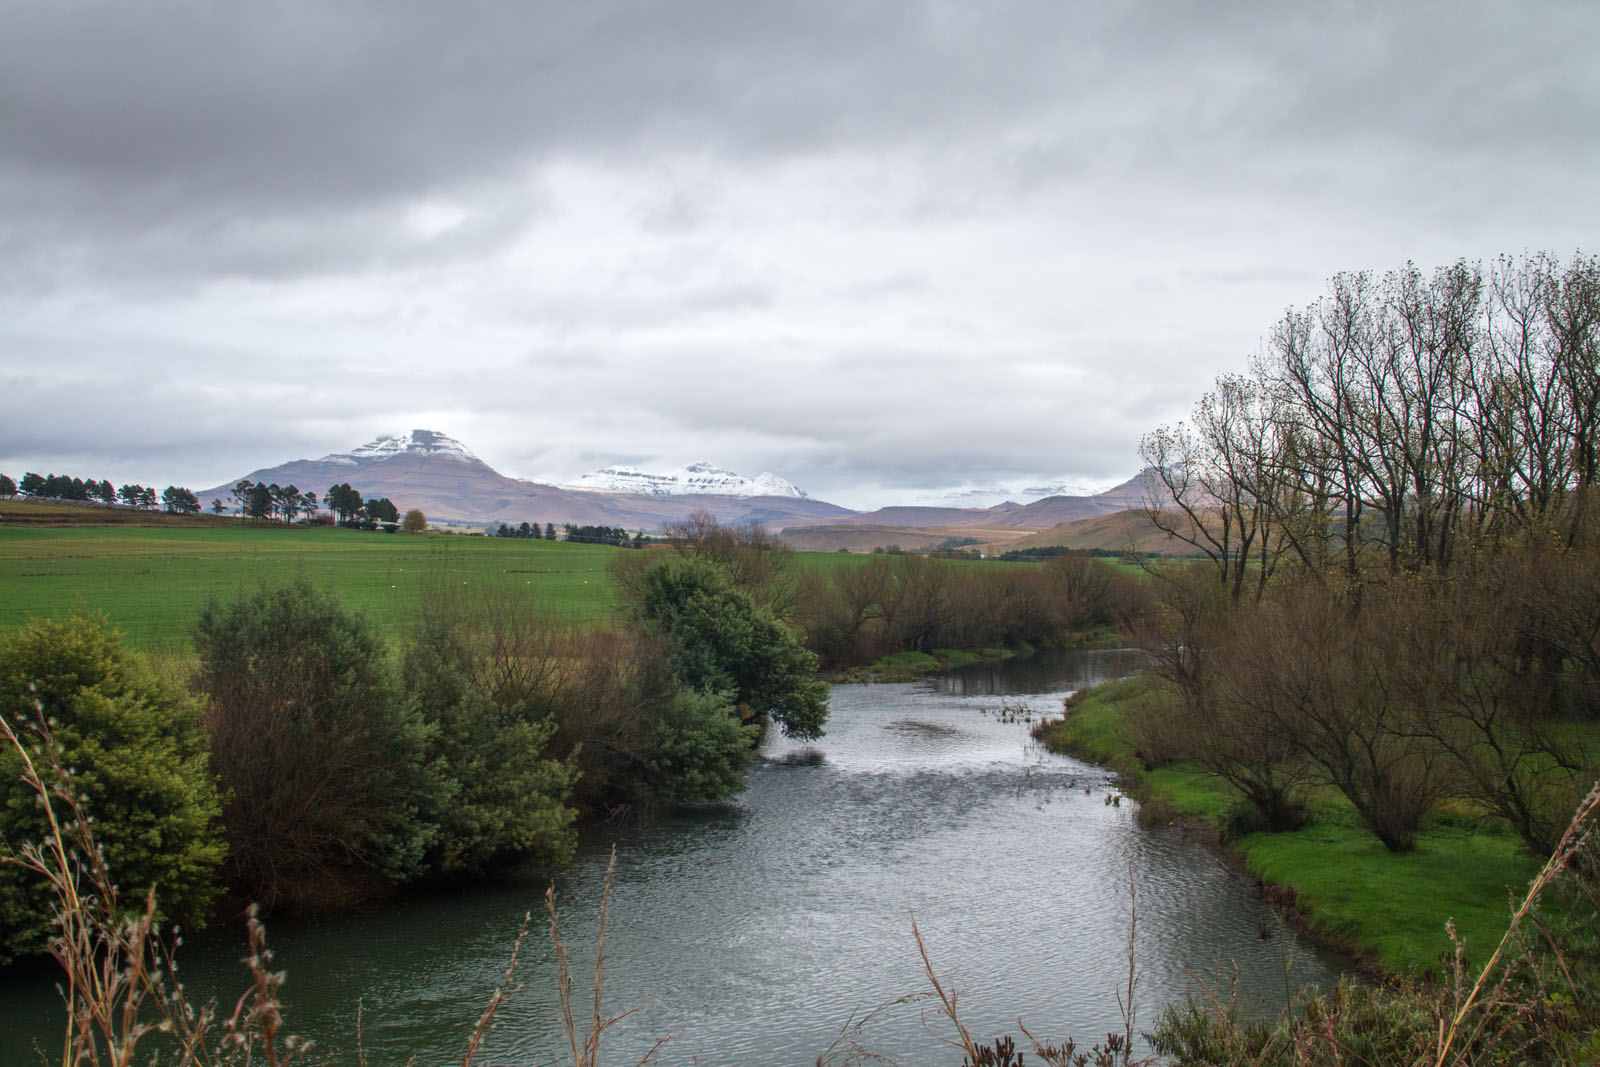 View of the snow capped mountains towering above Sinister Pool on the Umzimkulu River, Underberg